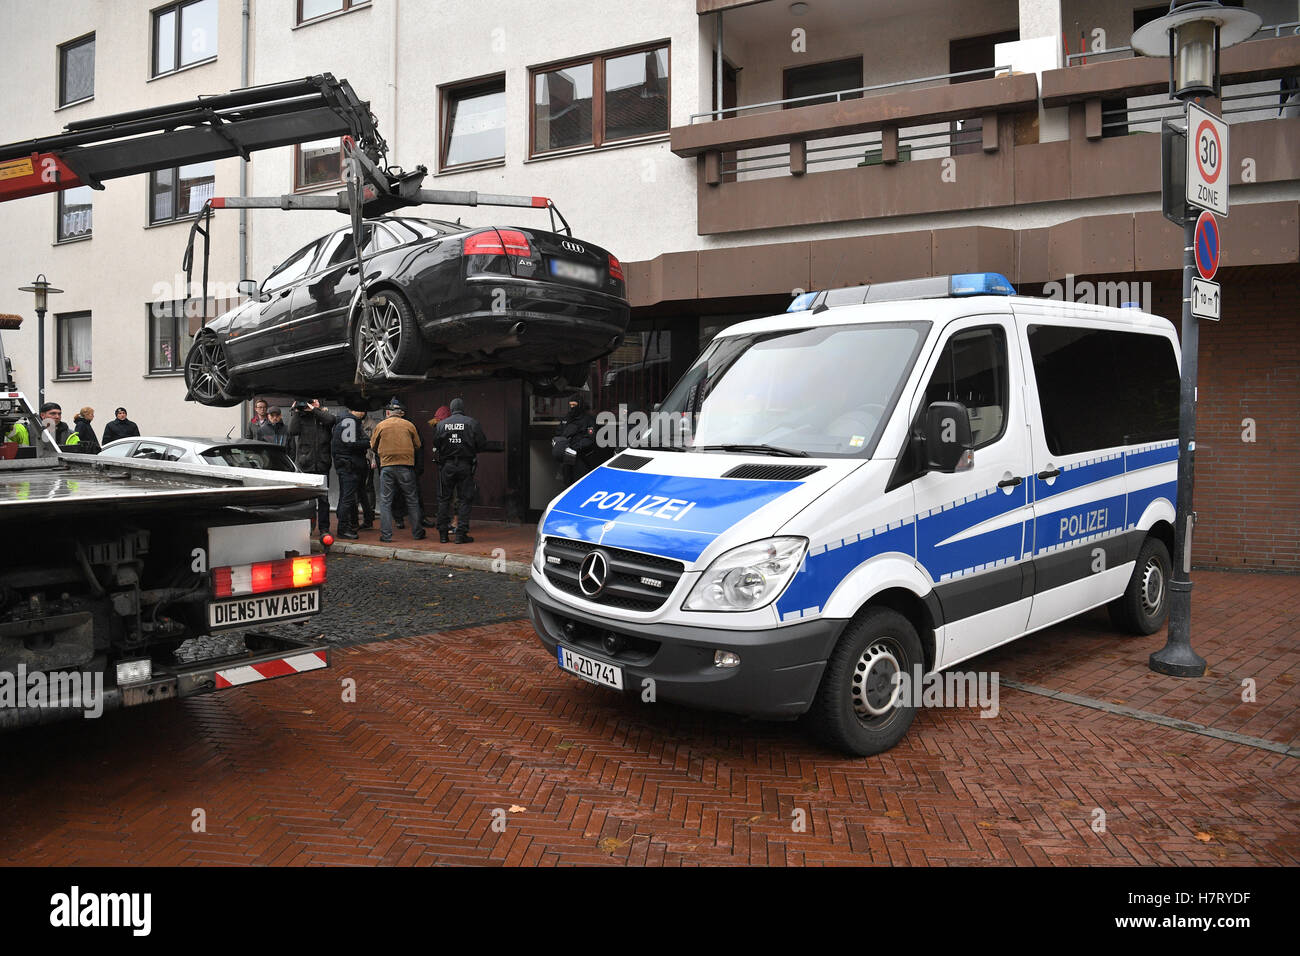 Police officers secure a private vehicle in a residential area in Hildesheim, Germany, 08 November 2016 during an investigation into suspected supporters of the terror group ISIS which resulted in five arrests in two German states on Tuesday morning. Photo: Julian Stratenschulte/dpa (ATTENTION EDITORS: The number plate of the vehicle has been pixelated for legal reasons in order to preserve the anonymity of its owner.) Stock Photo